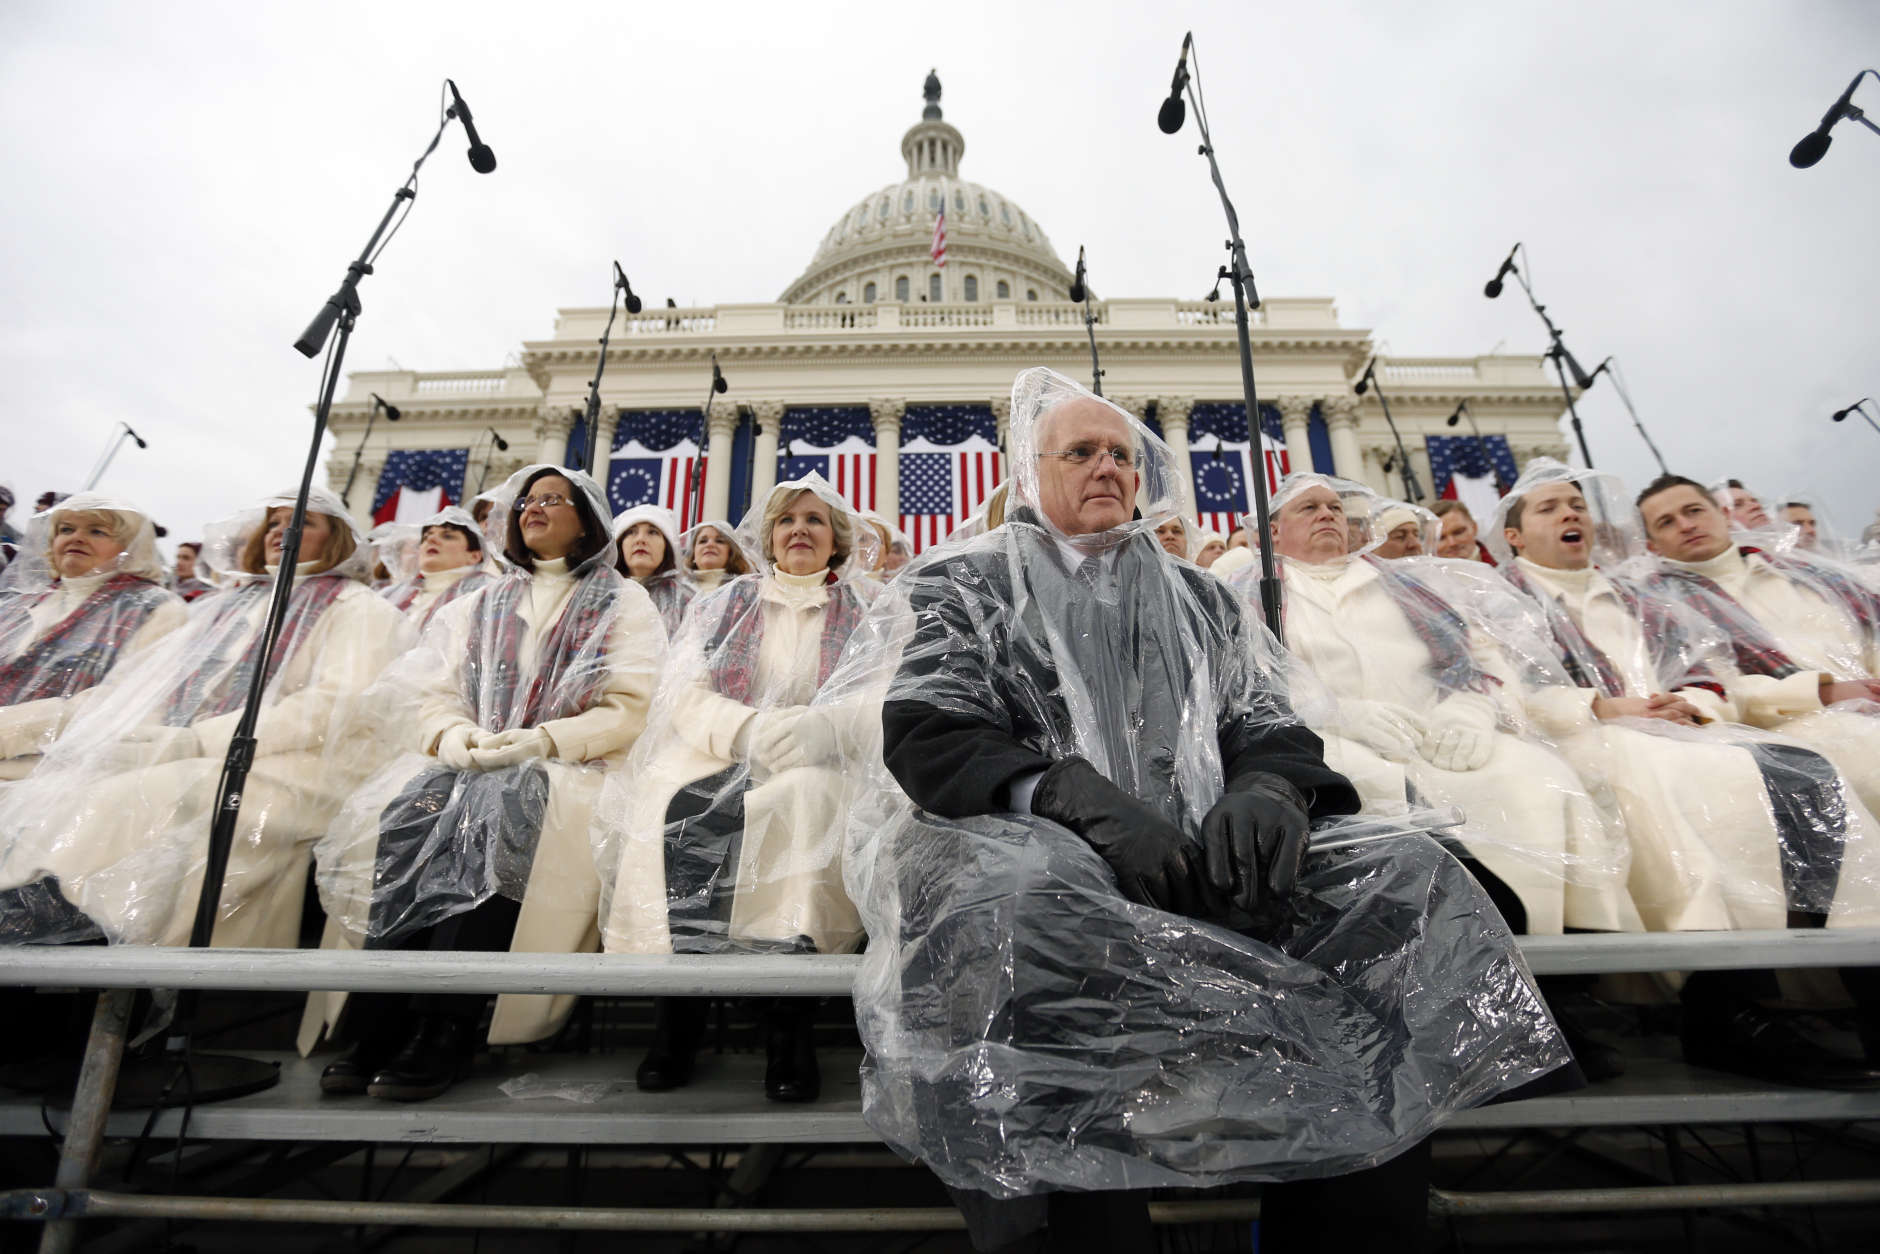 Members of the Mormon Tabernacle Choir sit in the rain waiting for the swearing in of Donald Trump as the 45th president of the United States to begin during the 58th Presidential Inauguration at the U.S. Capitol in Washington. Friday, Jan. 20, 2017 (AP Photo/Carolyn Kaster)